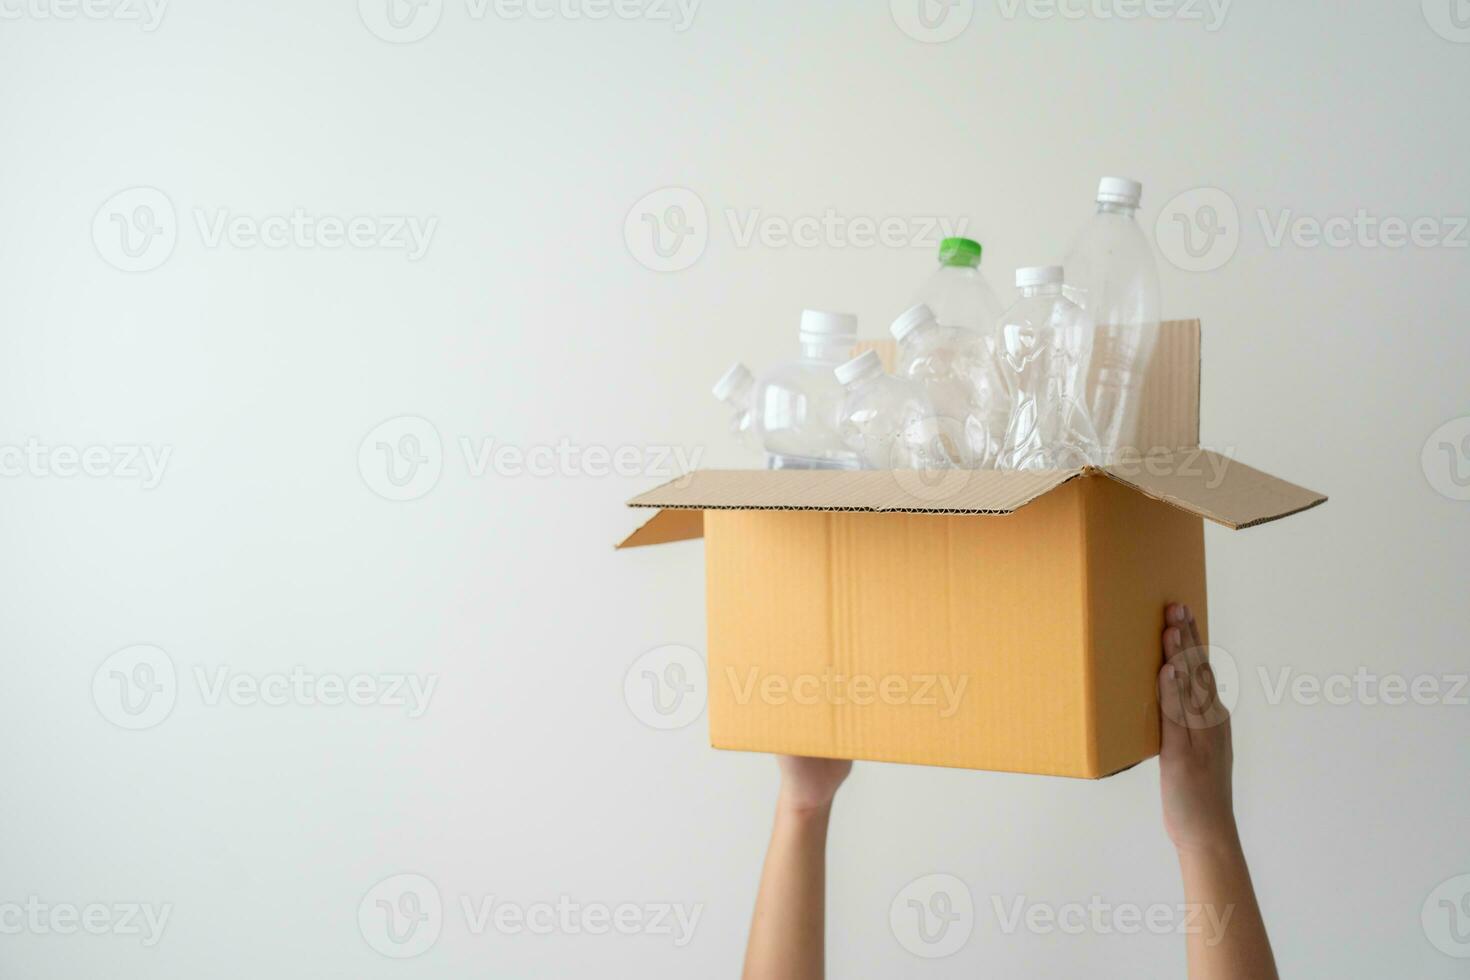 People launch a campaign to recycle used empty plastic bottles. Hands holding cardboard box full with plastic bottle ready to recycle. Concept of reuse, reduce, recycle to save the environment photo